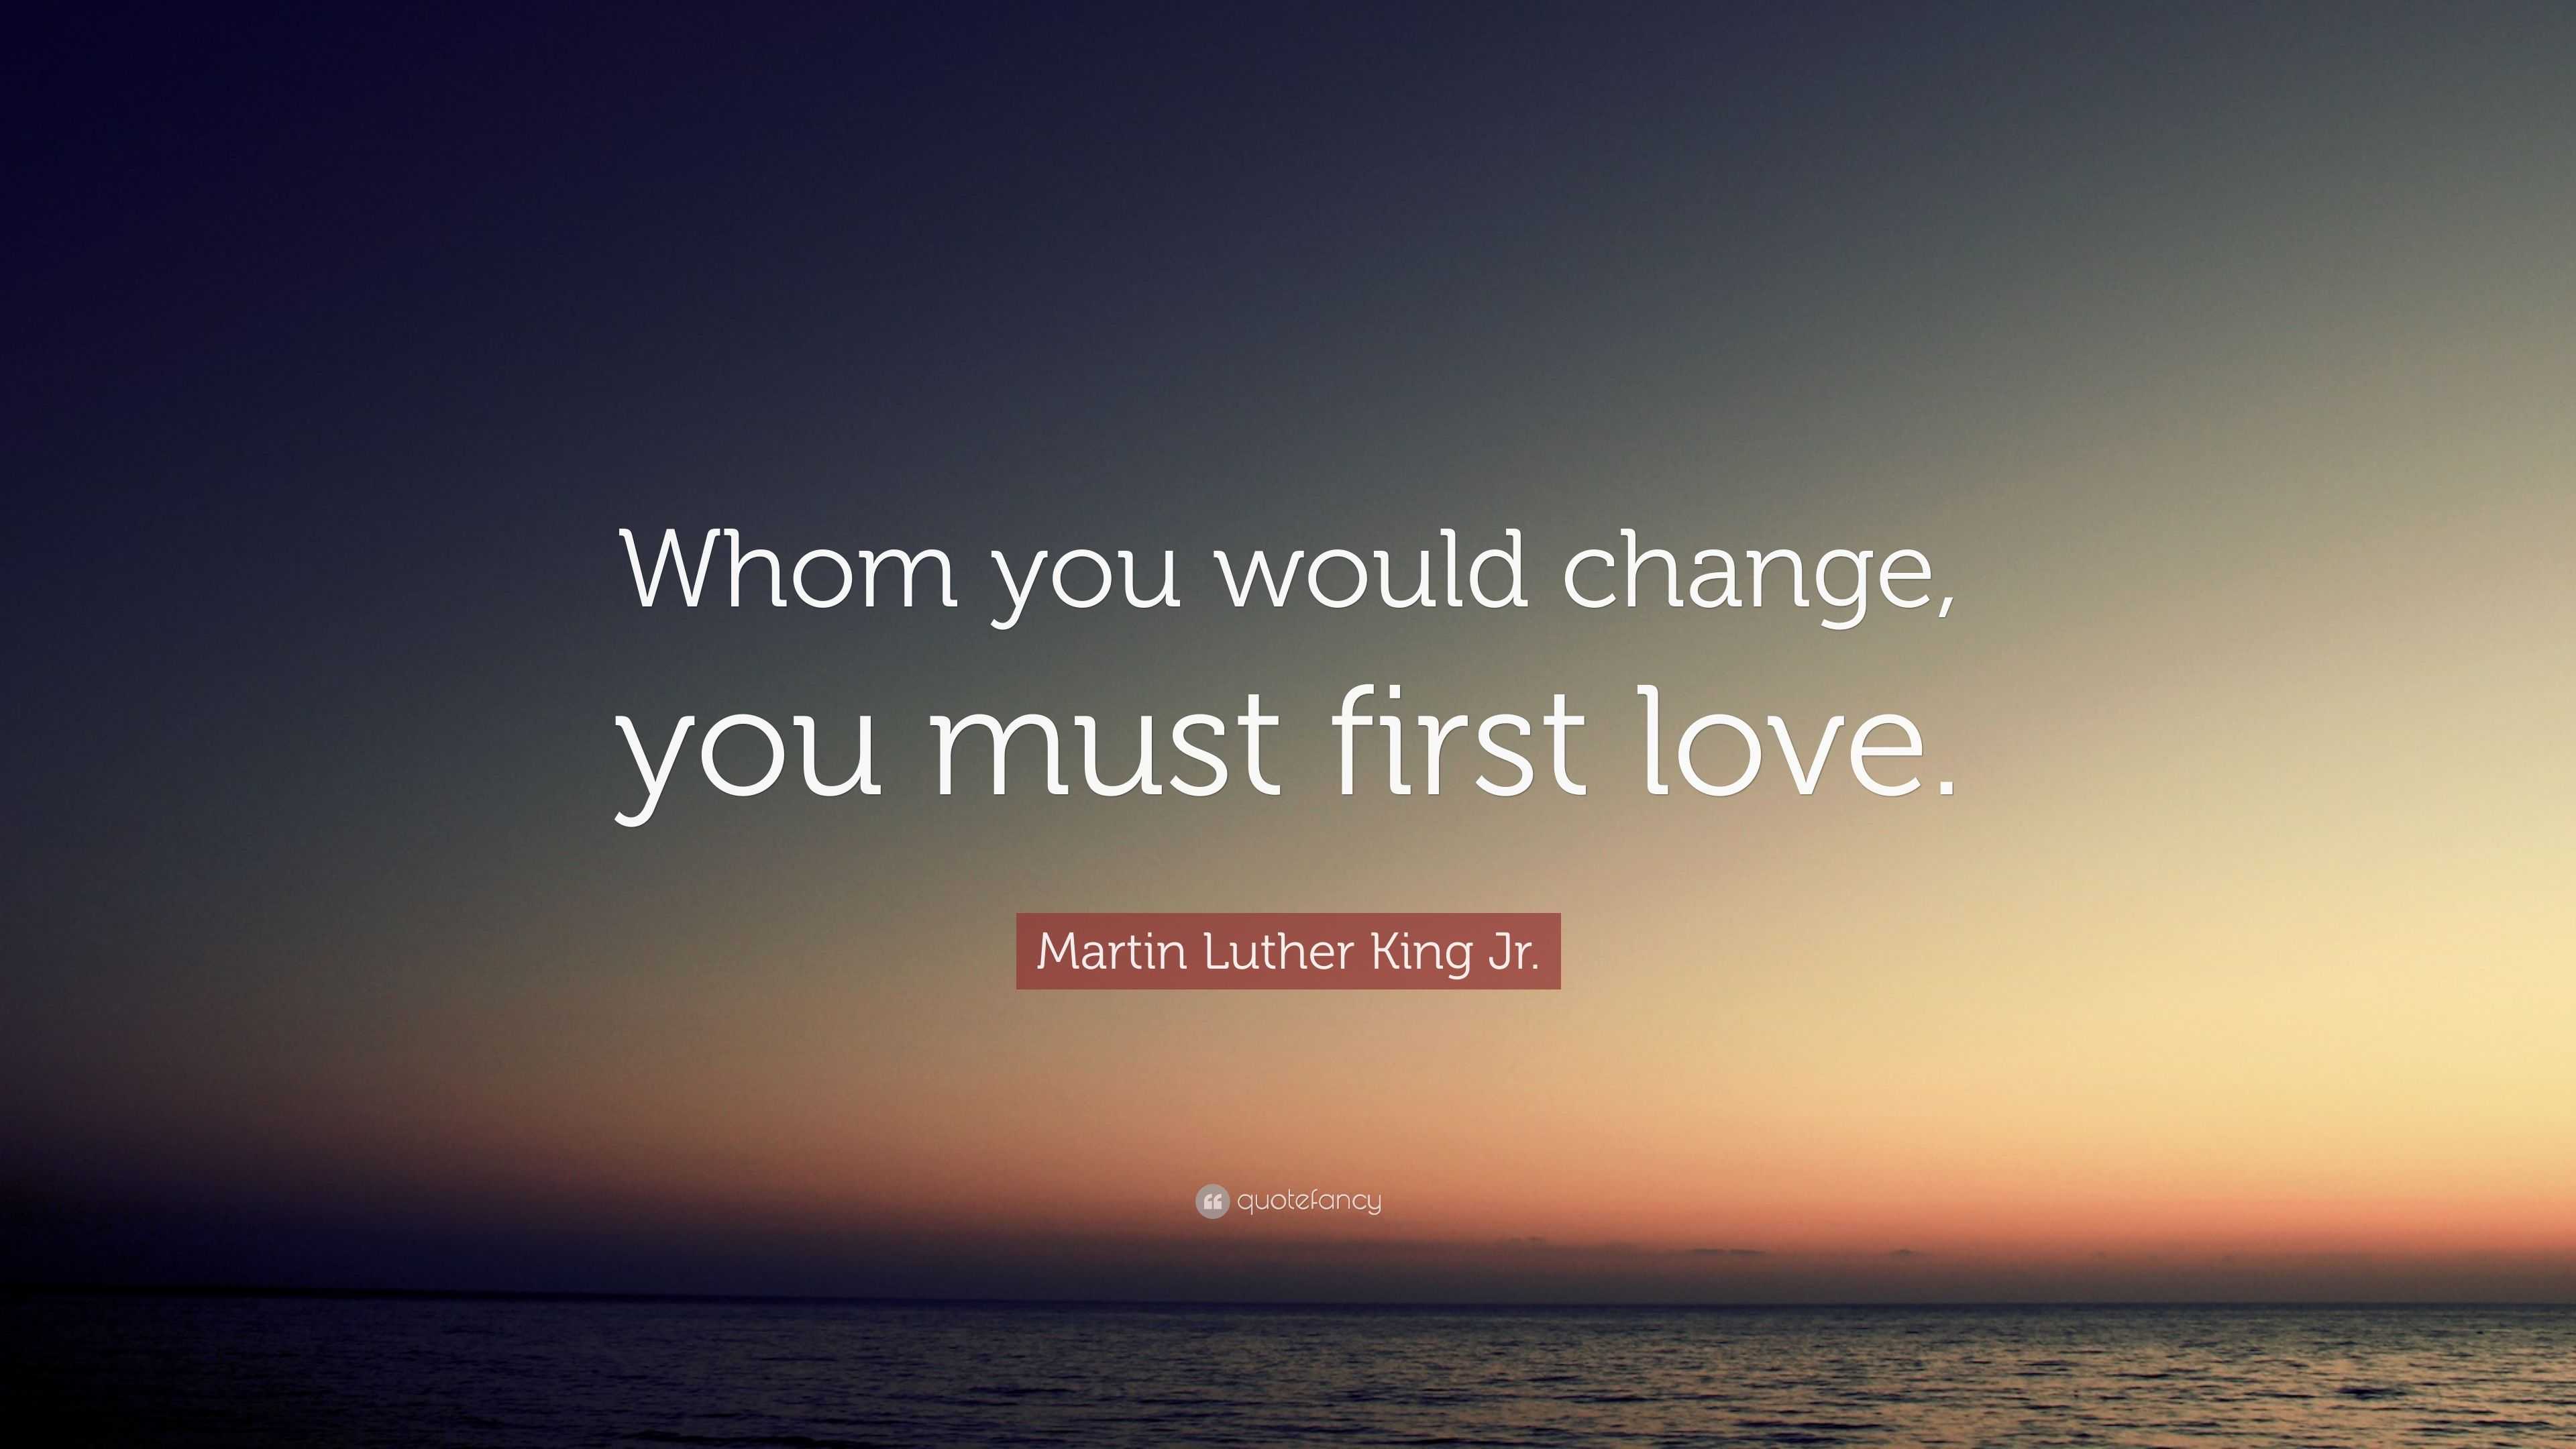 Martin Luther King Jr. Quote: “Whom you would change, you must first love.”